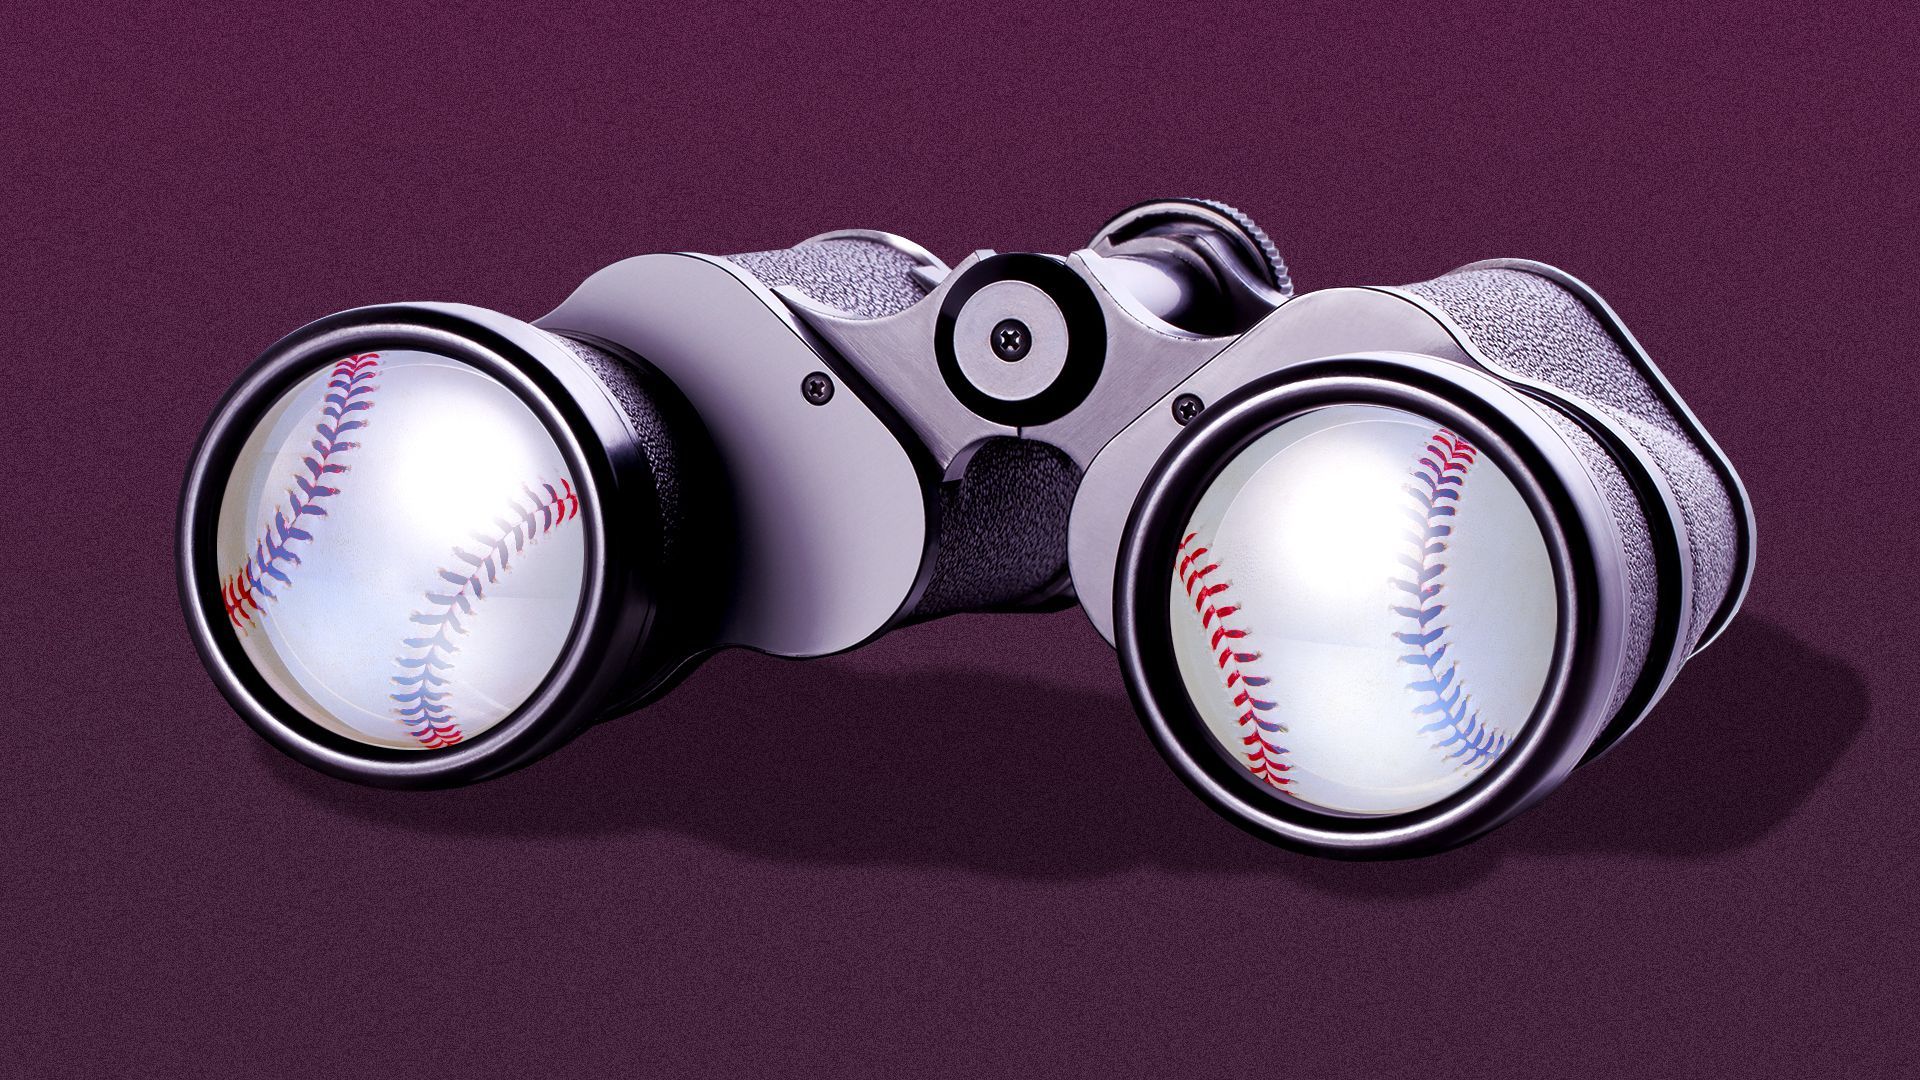 Illustration of a pair on binoculars with baseballs in place of the lenses